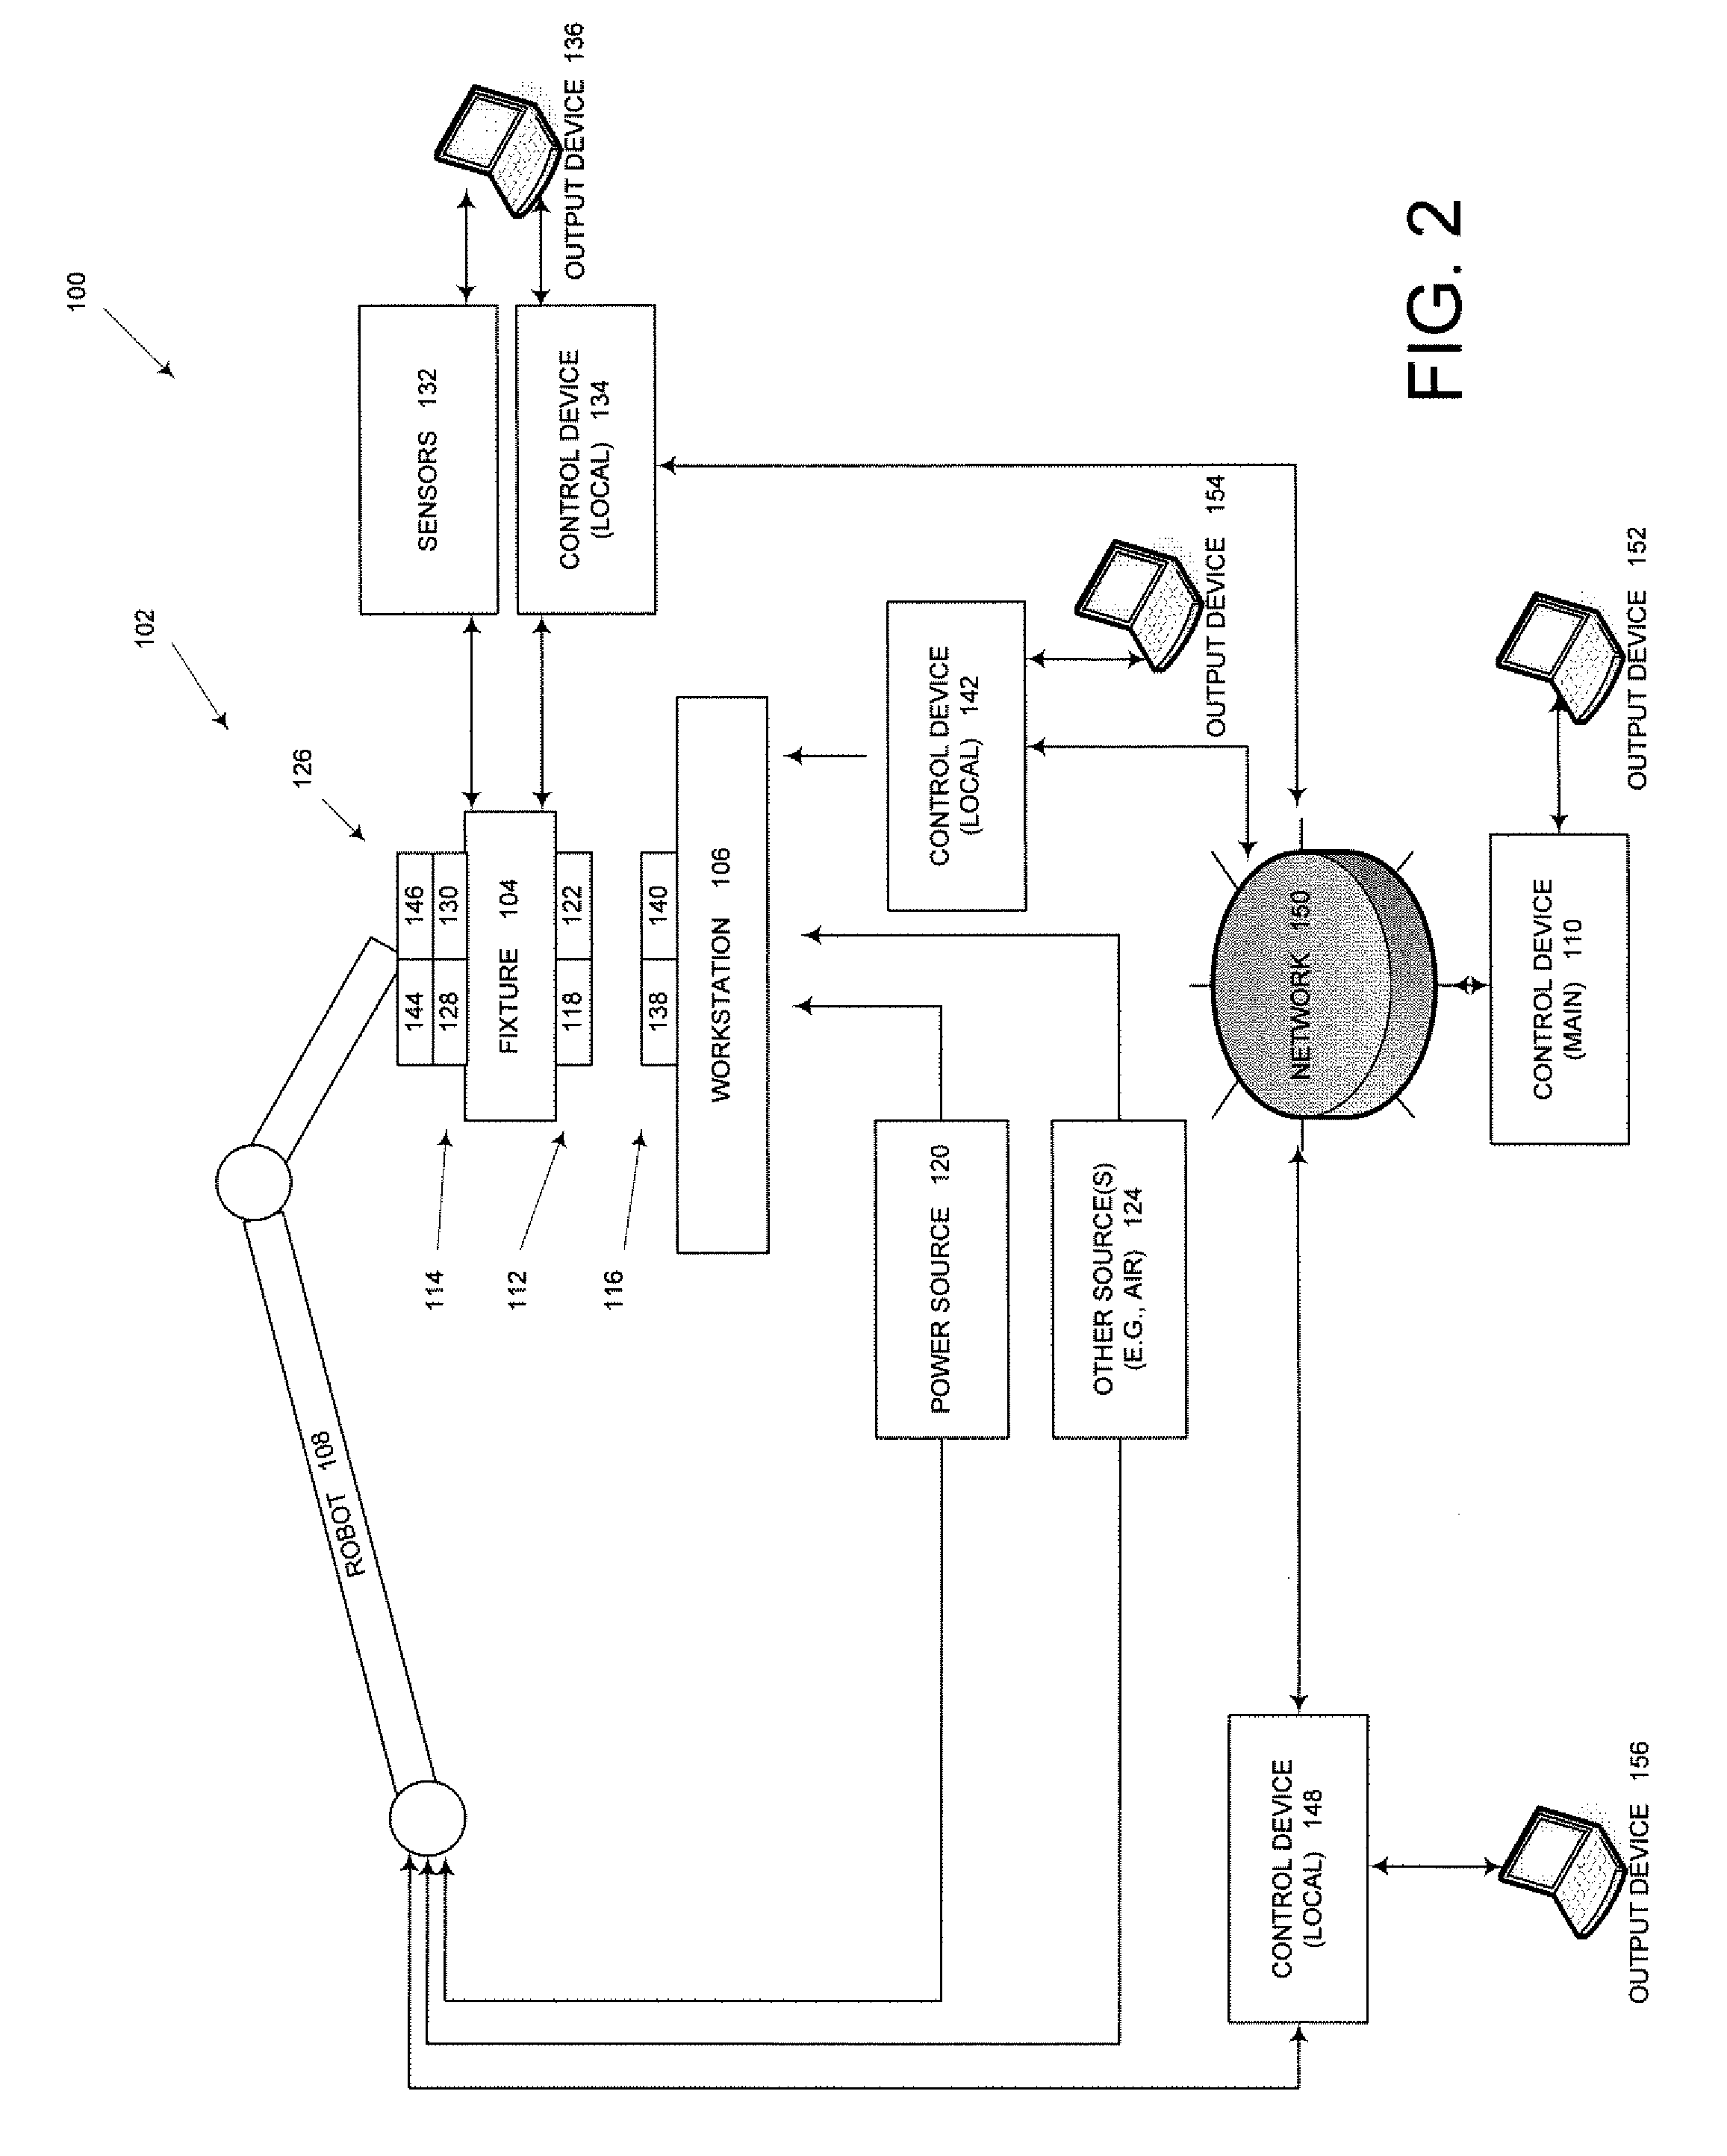 Systems, methods, and apparatus for providing continuous power to a fixture in a manufacturing process